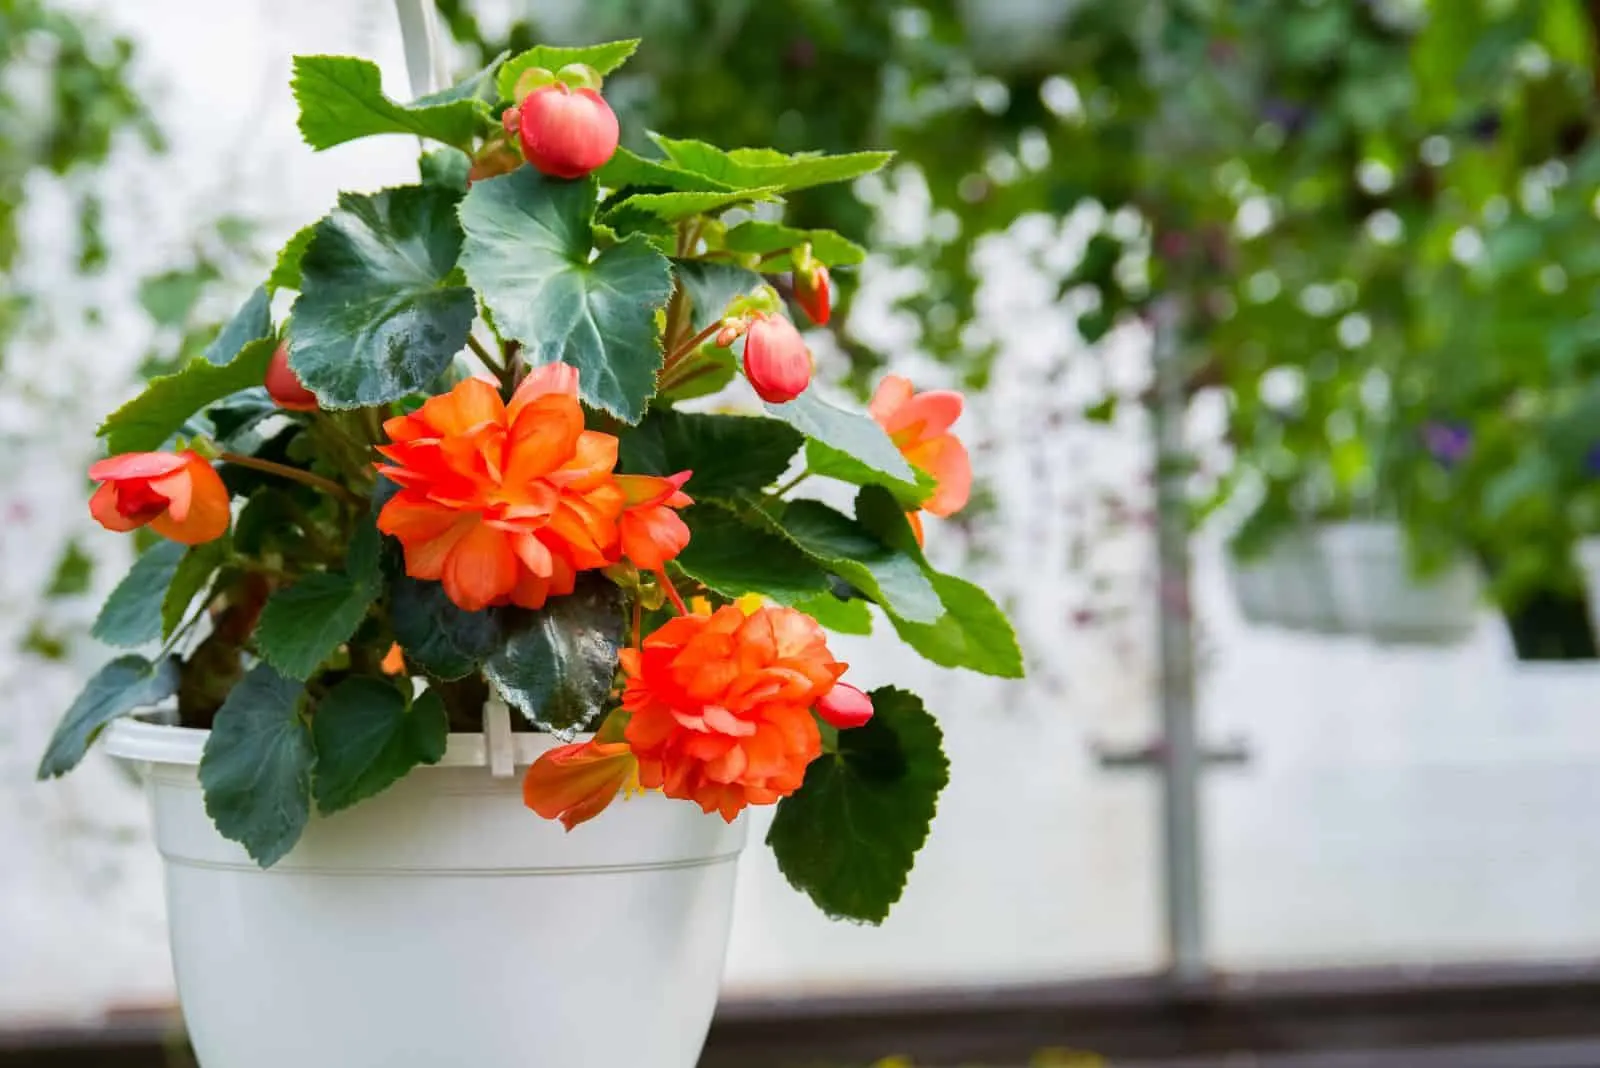 begonia in a white pot